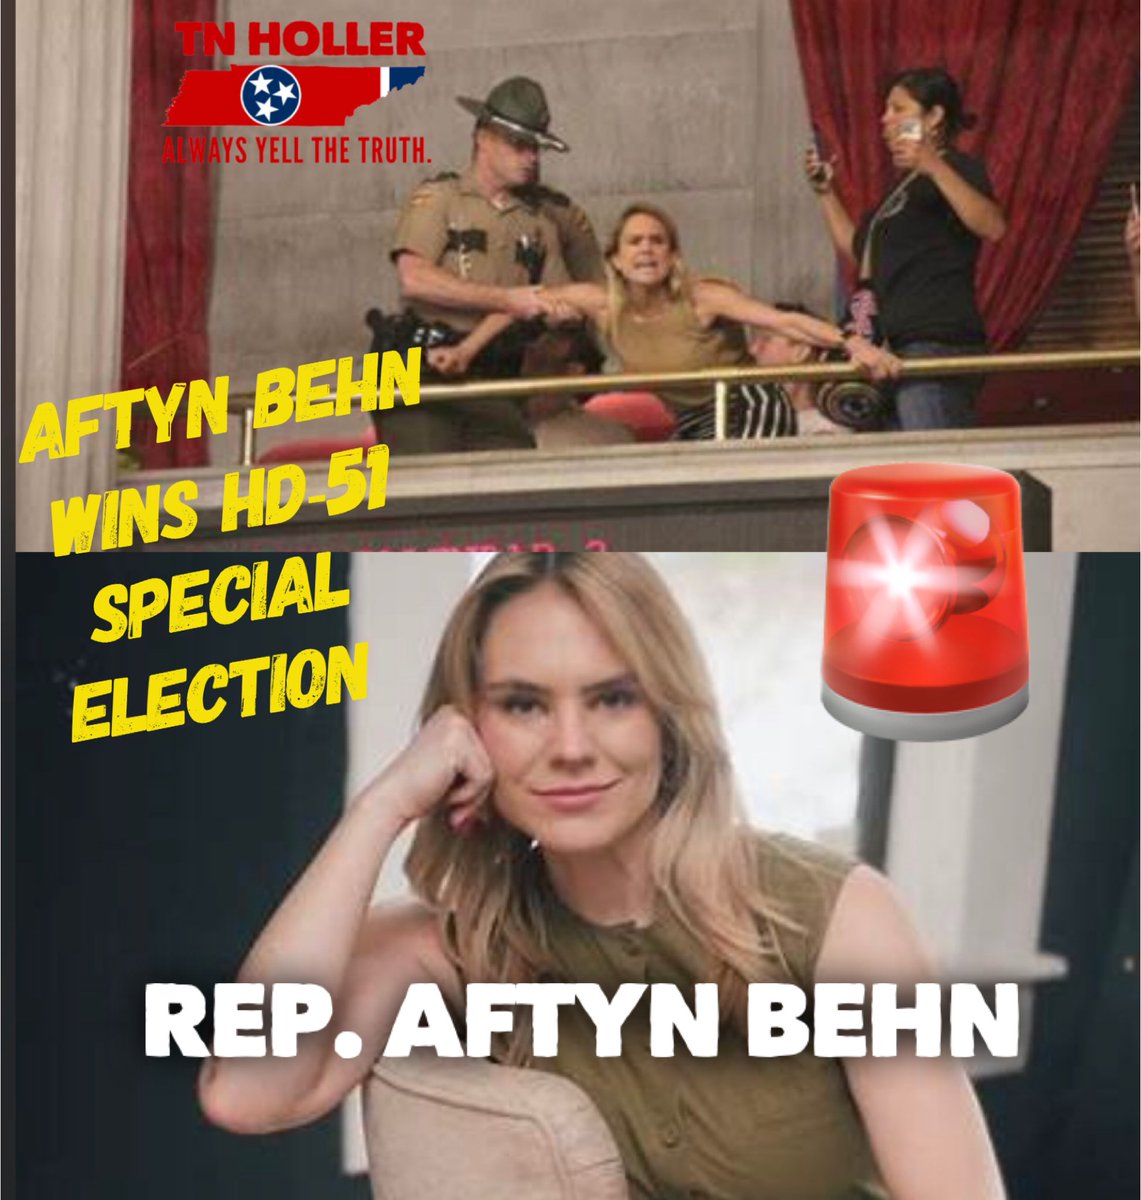 🚨 BREAKING: long-time progressive activist @AftynBehn has just won her NASHVILLE HD-51 race, and will now be a state house representative 👀 🎉